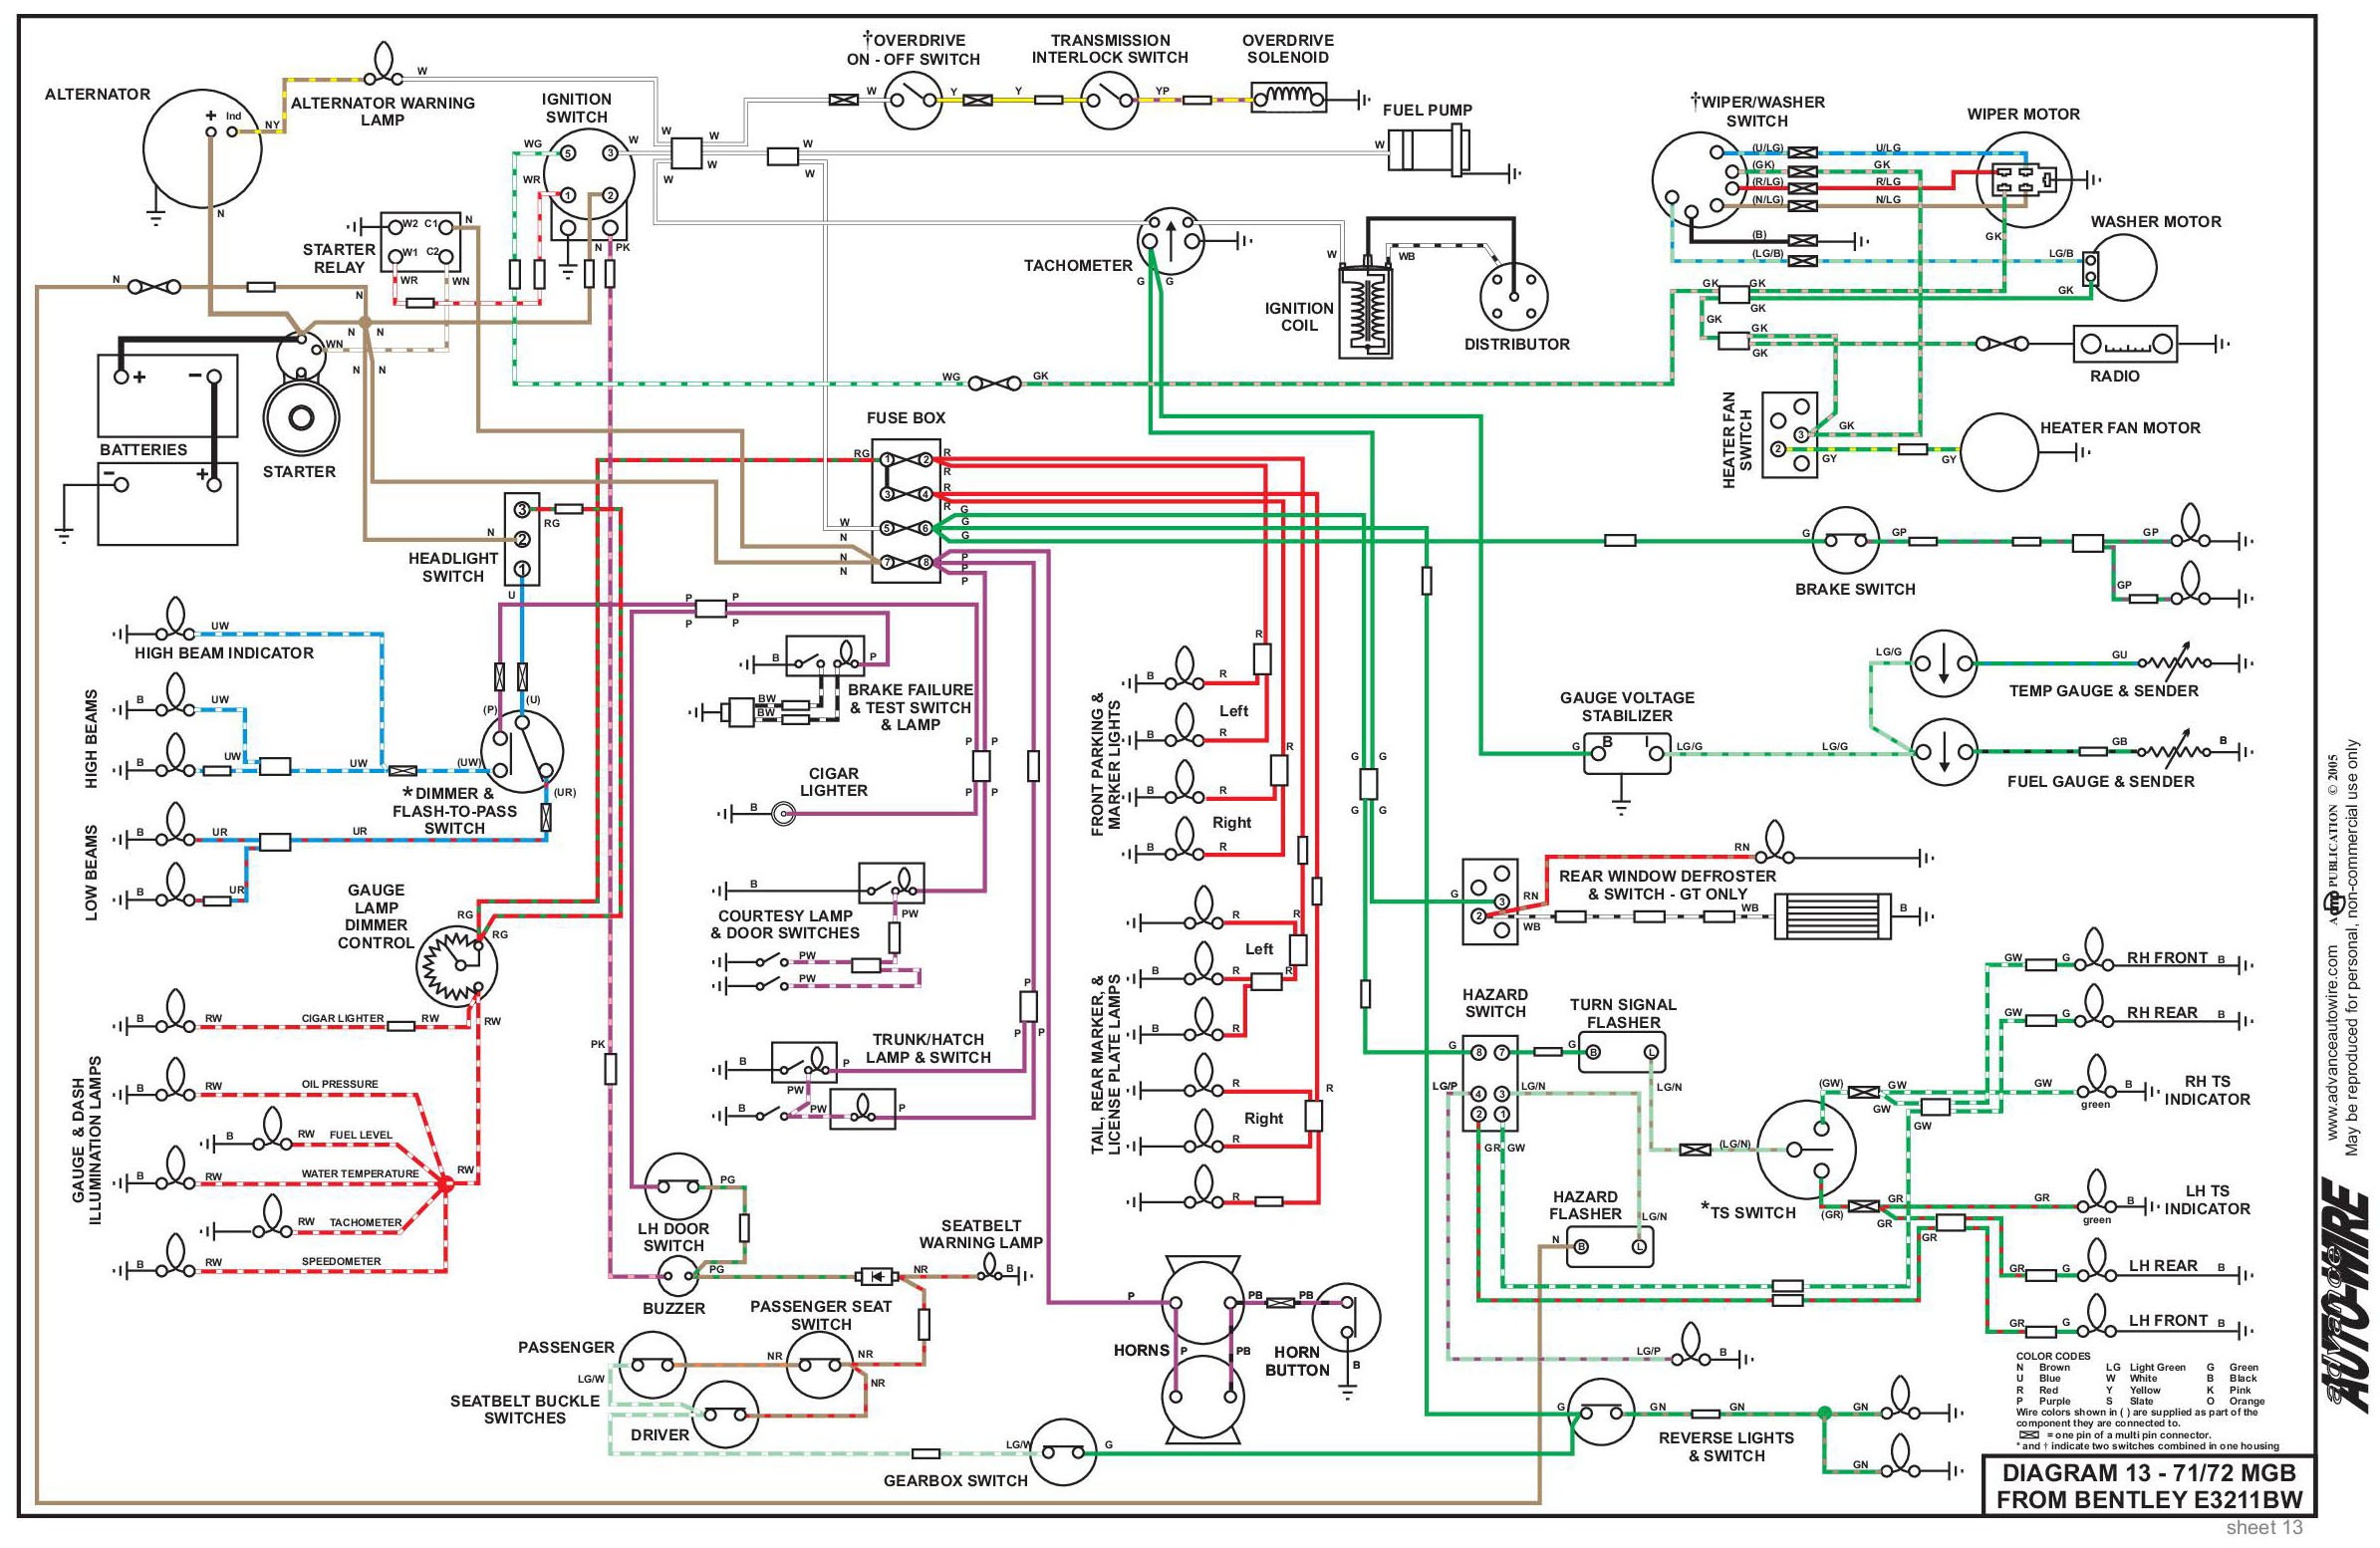 Turn Signal Flasher Schematic Electrical System Of Turn Signal Flasher Schematic